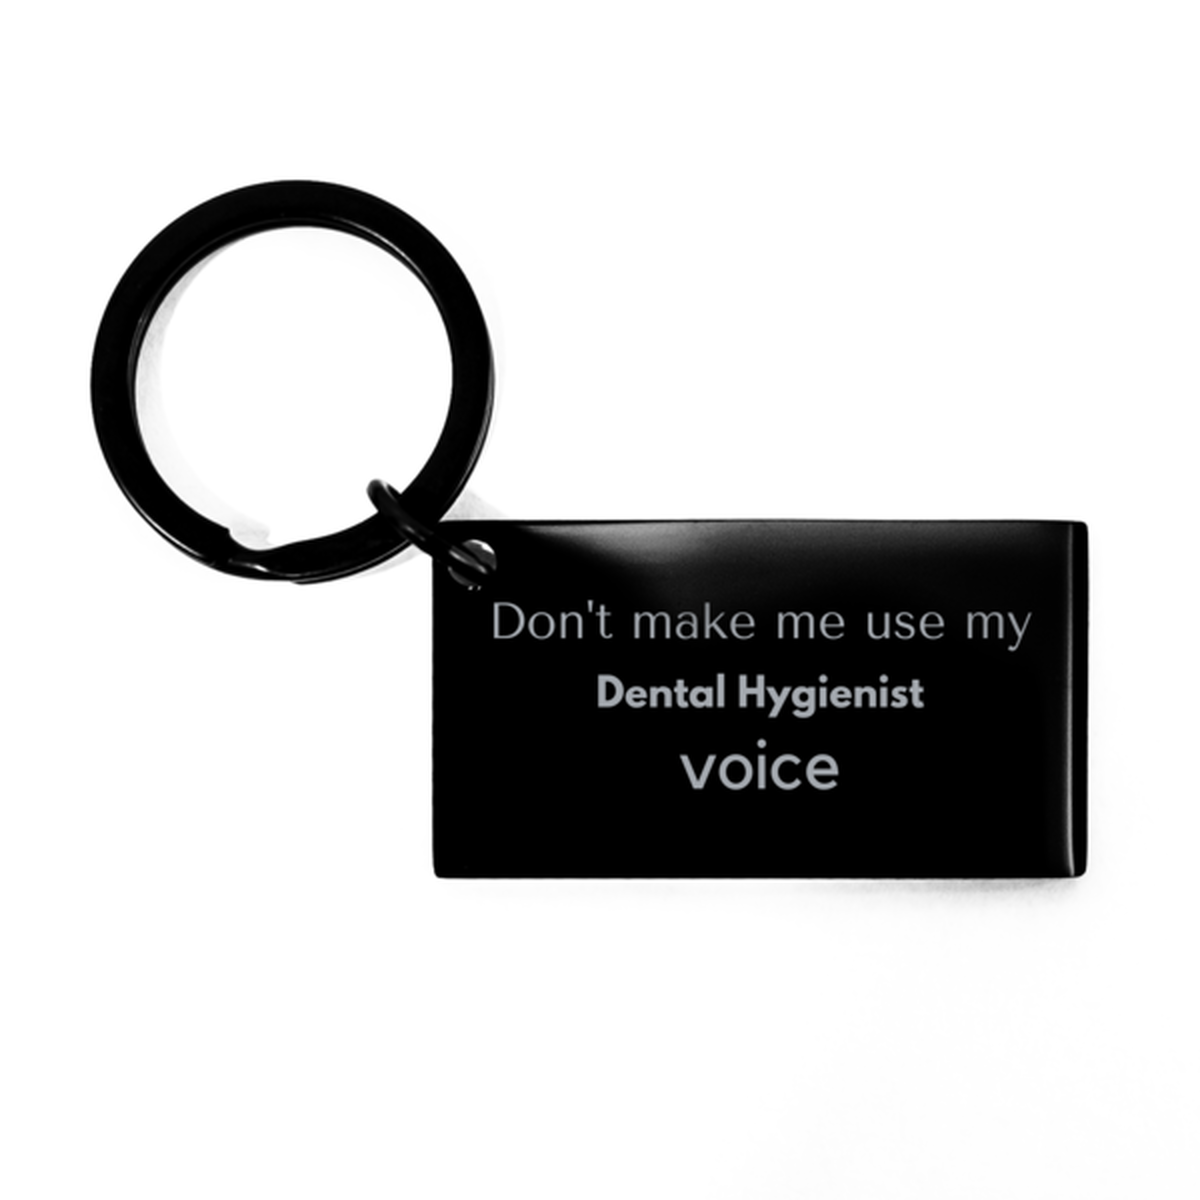 Don't make me use my Dental Hygienist voice, Sarcasm Dental Hygienist Gifts, Christmas Dental Hygienist Keychain Birthday Unique Gifts For Dental Hygienist Coworkers, Men, Women, Colleague, Friends